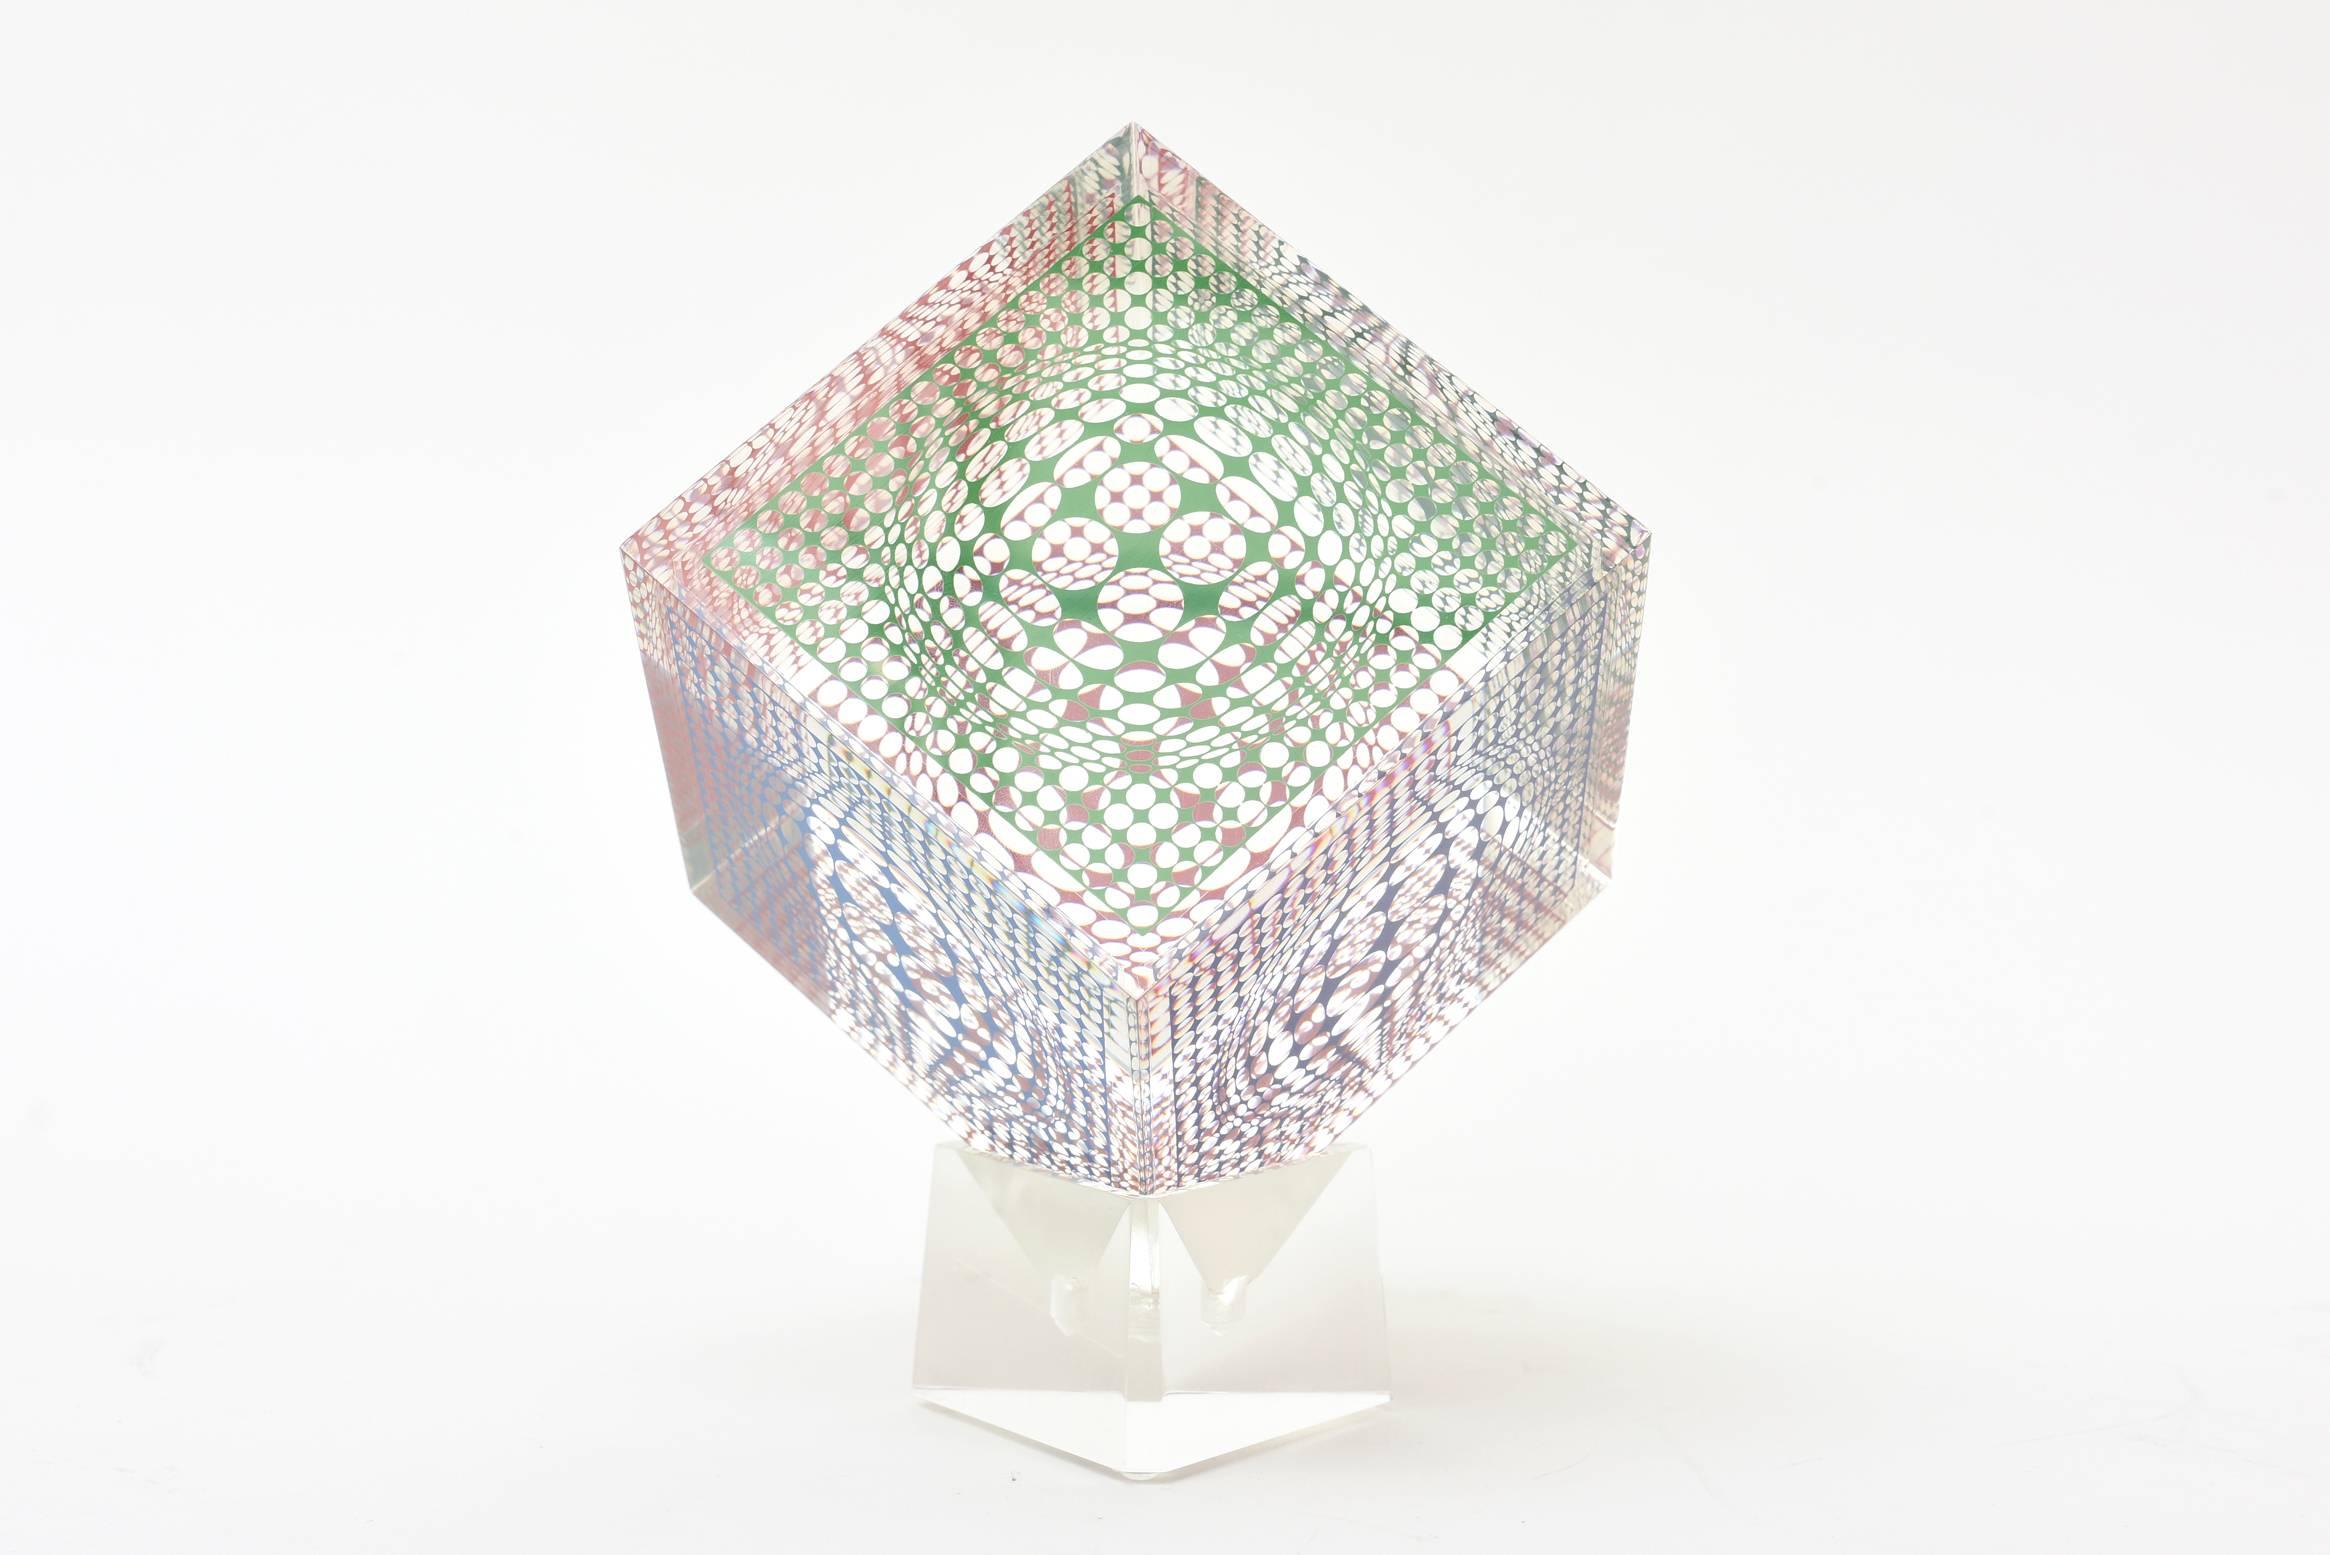 This wonderful angled Victor Vasarely op art Lucite sculpture is different color patterns and graphics on all four sides. It creates an optical movement and illusion. One can change each side in the Lucite stand. This one is great!
Vasarely was the